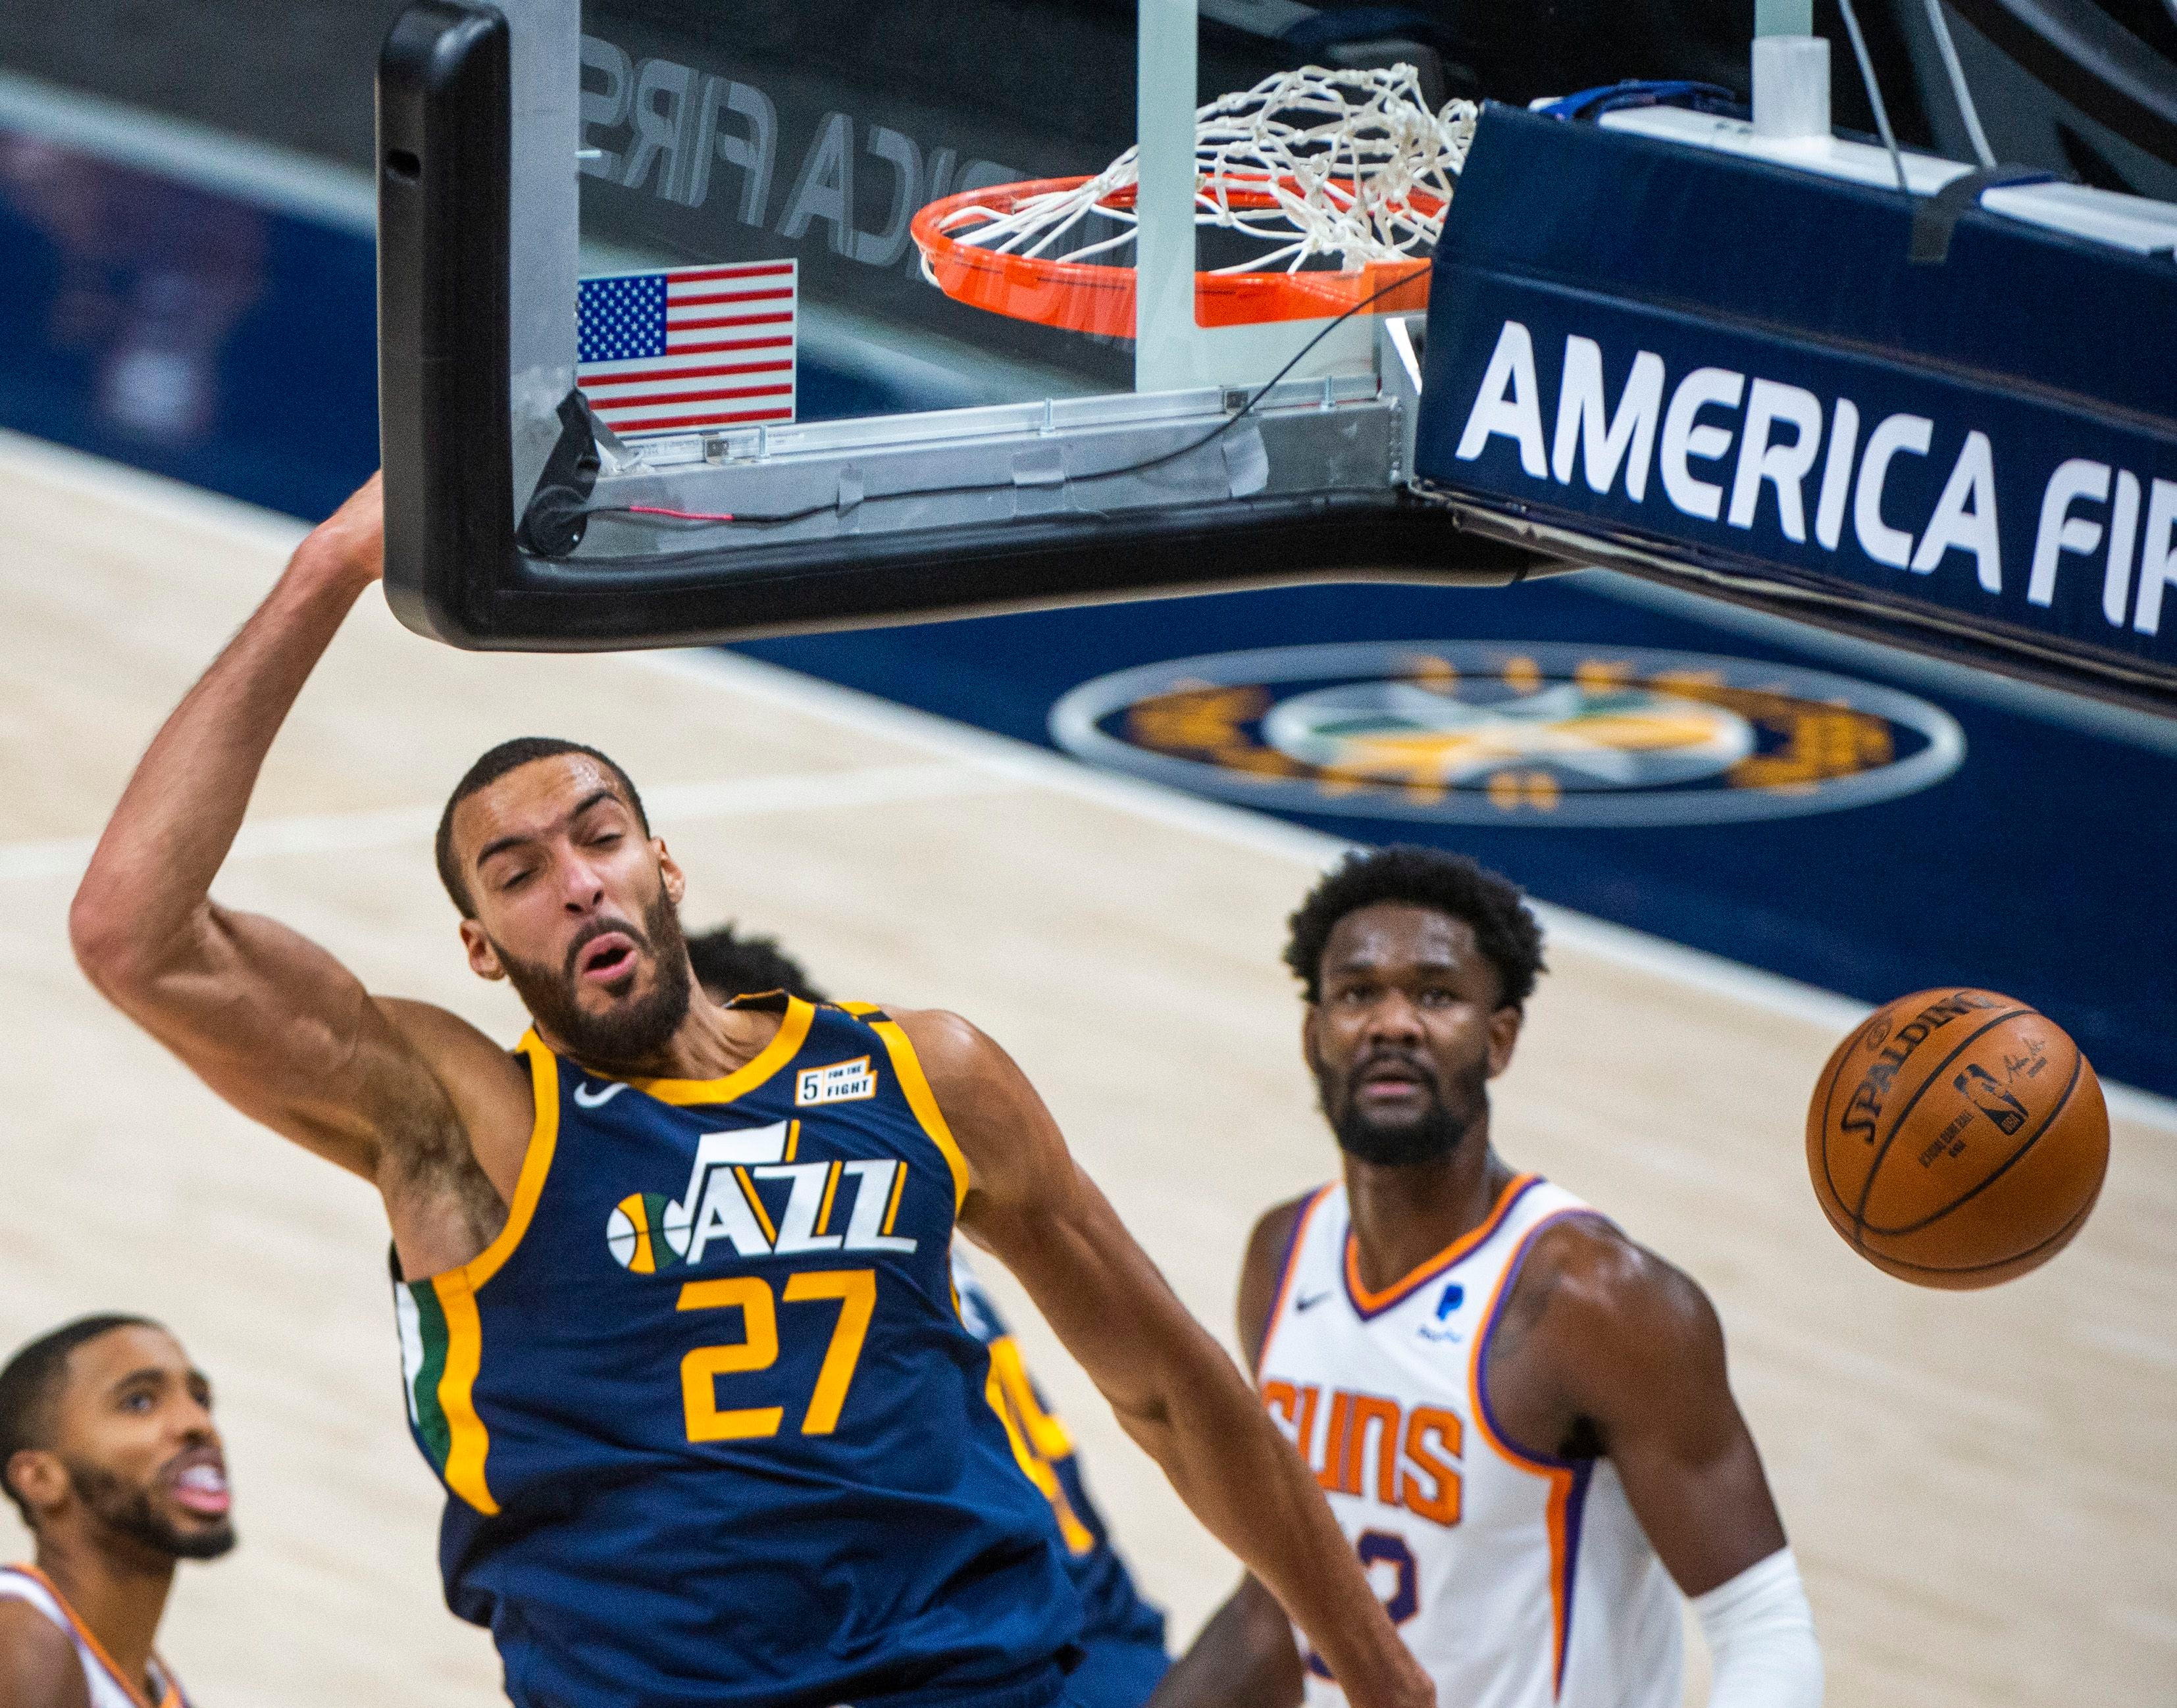 The 5 Best Utah Jazz teams of All-Time according to